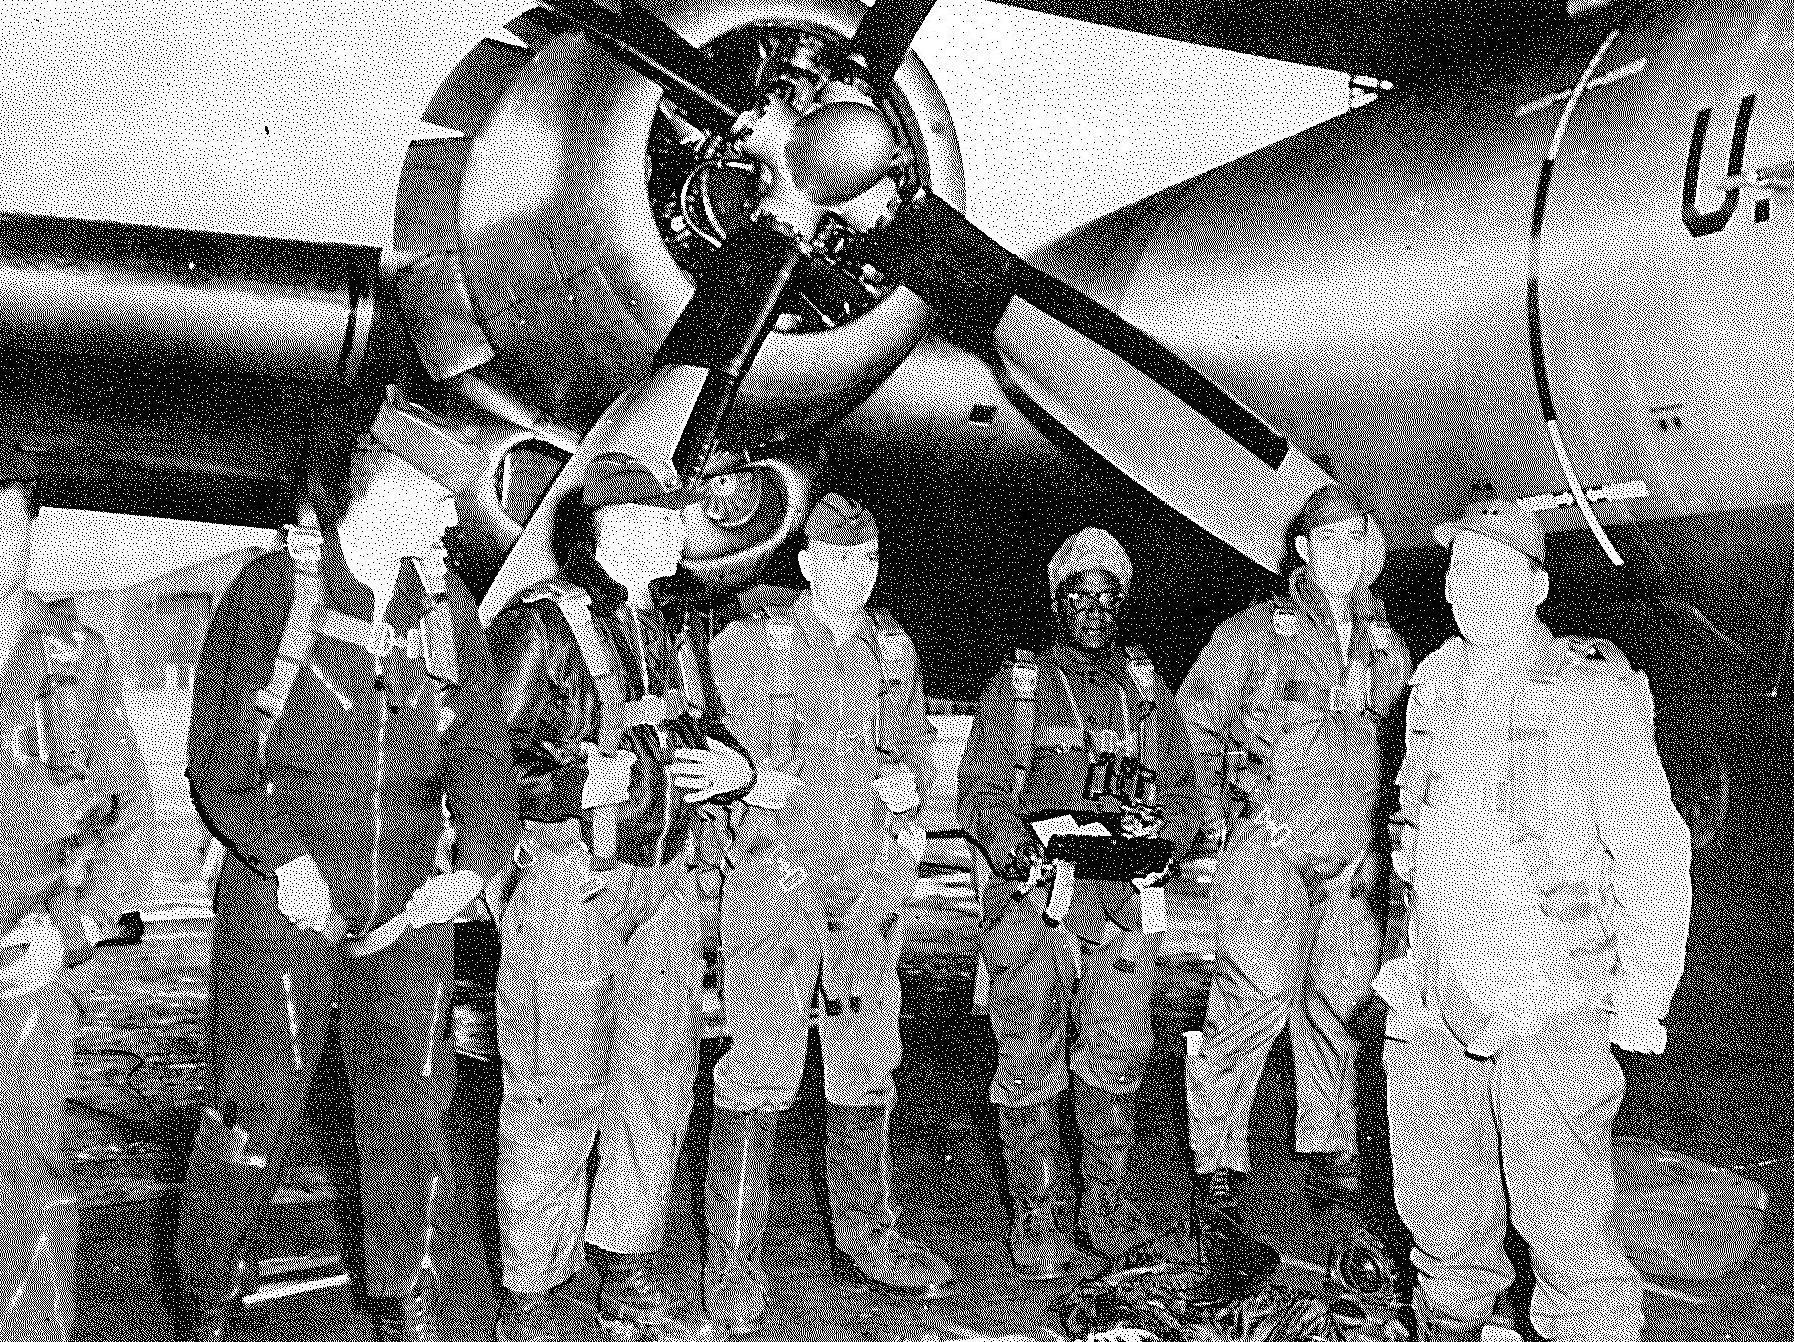 Herbert Frisby and the crew of the B-29 just before the flight that took Frisby directly over the geographic North Pole. Frisby dropped a steel box containing a U.S. flag and a bronze memorial plaque to Matthew Henson, the first African-American to reach the geographic North Pole. The geographic North Pole is the northernmost point of the earth, and is the direction of true north. The North magnetic pole is the point where the earth’s magnetic field points vertically downward and is where traditional magnetic compasses point towards. The magnetic pole is located some 200 miles south of the geographic North Pole and is constantly moving.  